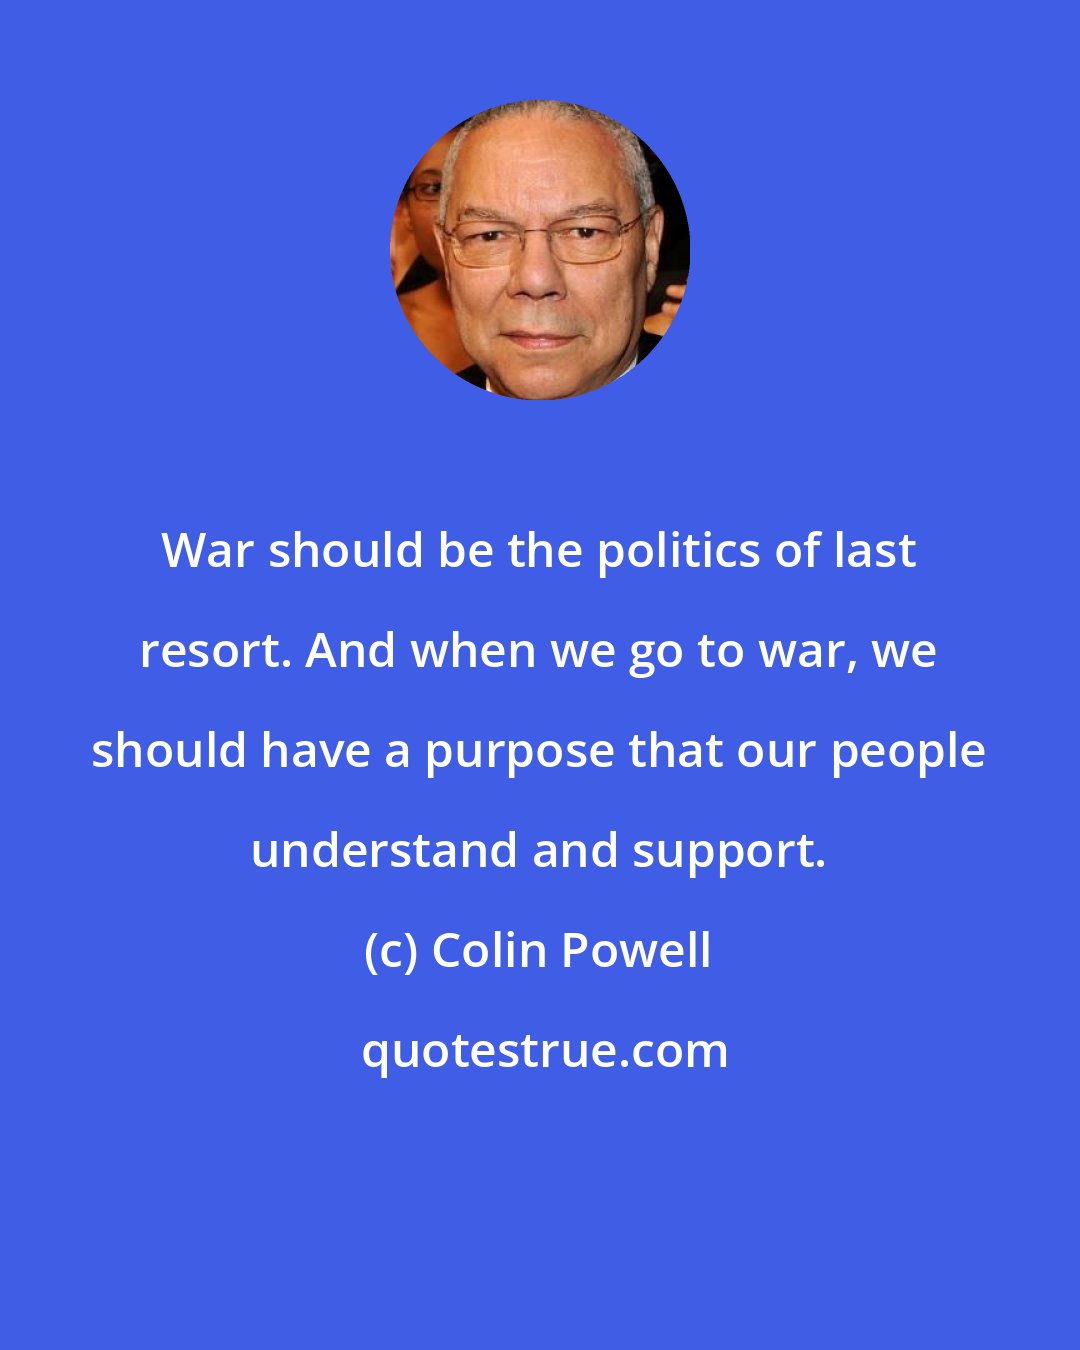 Colin Powell: War should be the politics of last resort. And when we go to war, we should have a purpose that our people understand and support.